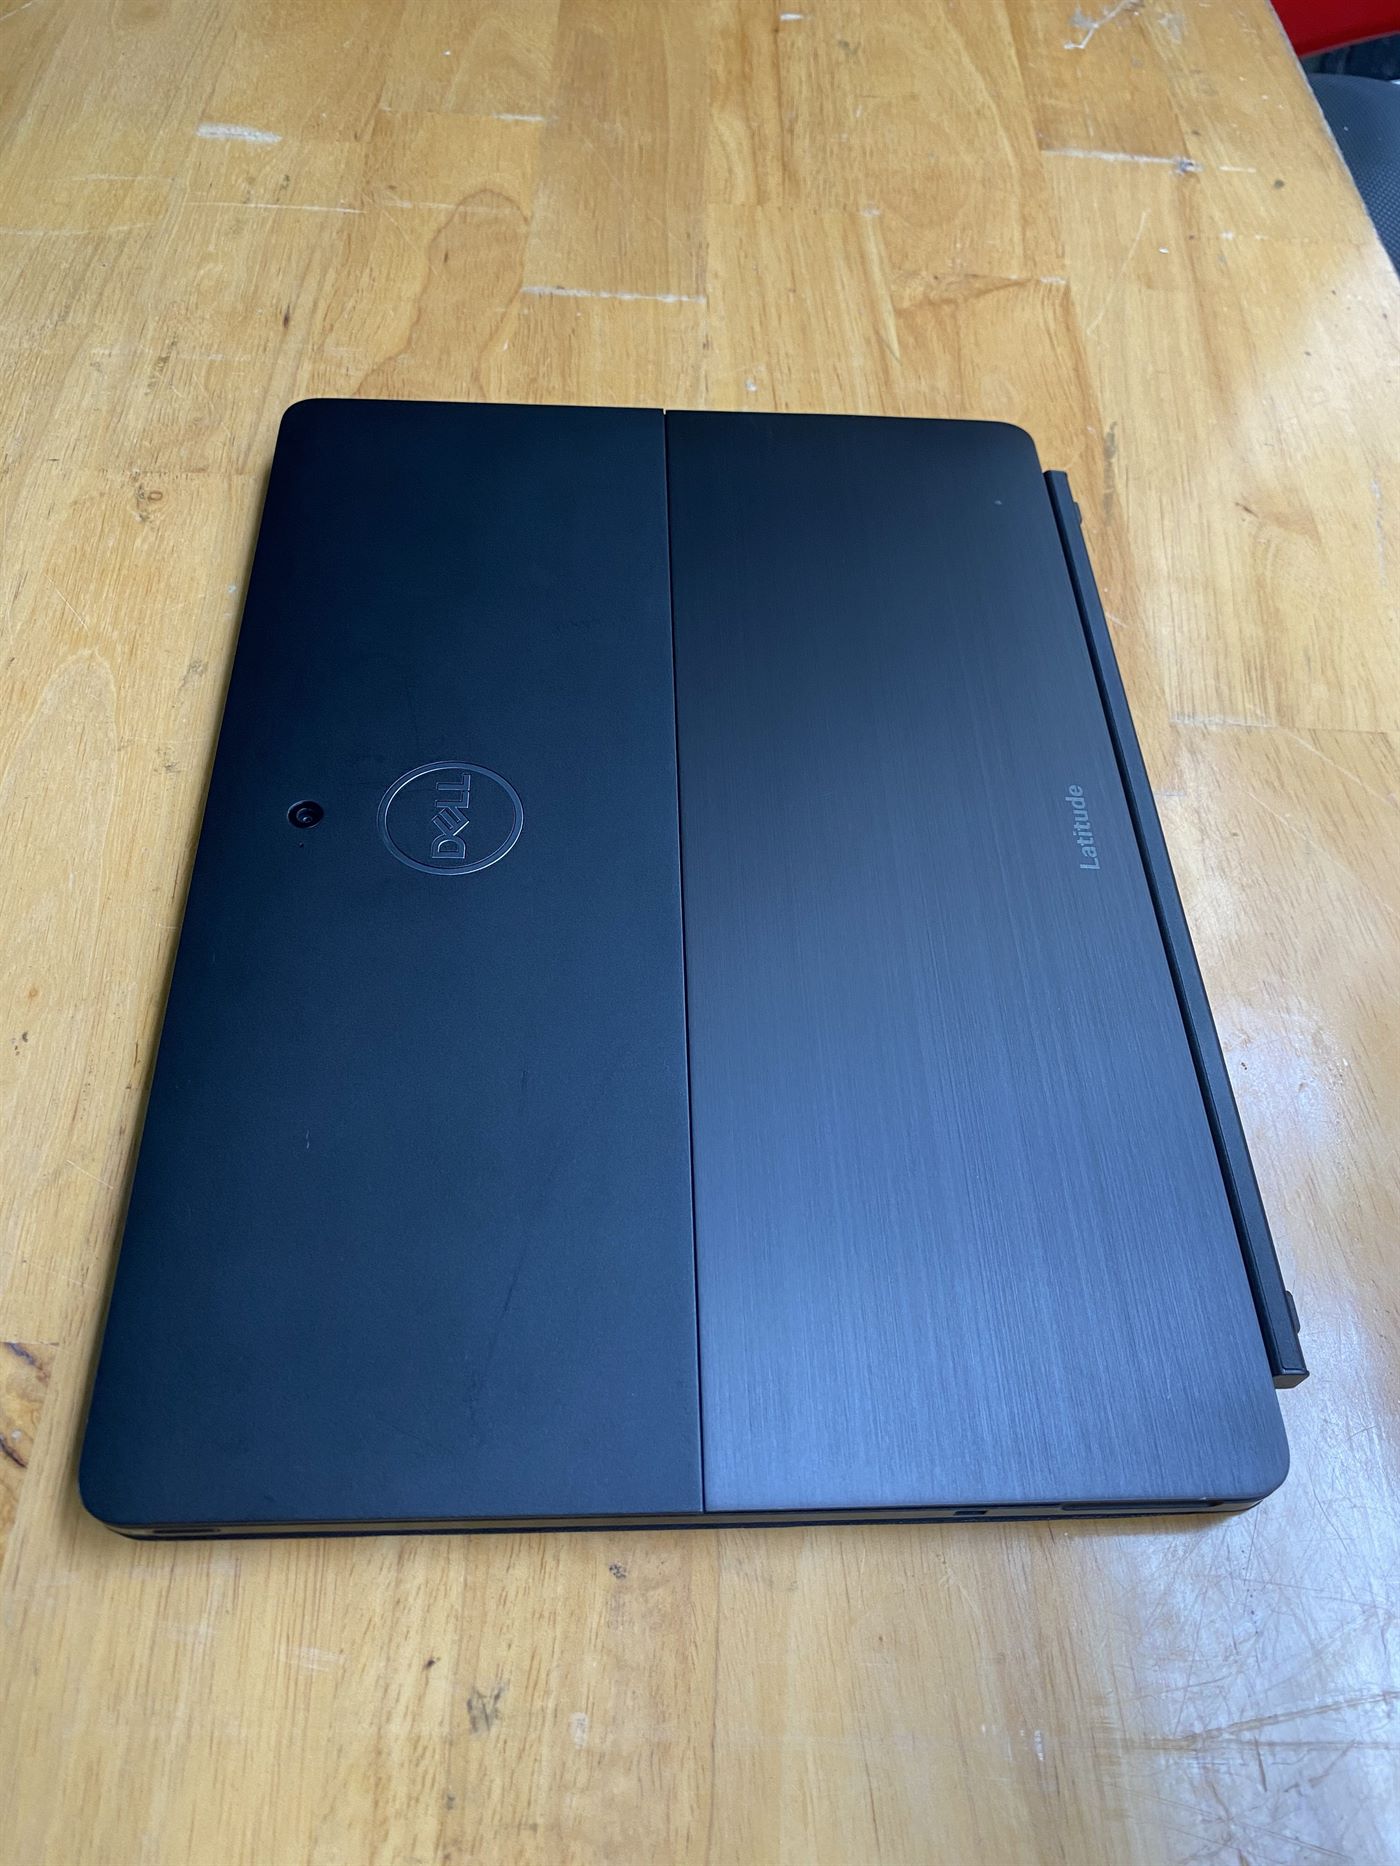 Dell Latitude 5290 2in1 Core i5 (1) - laptop cũ giá rẻ